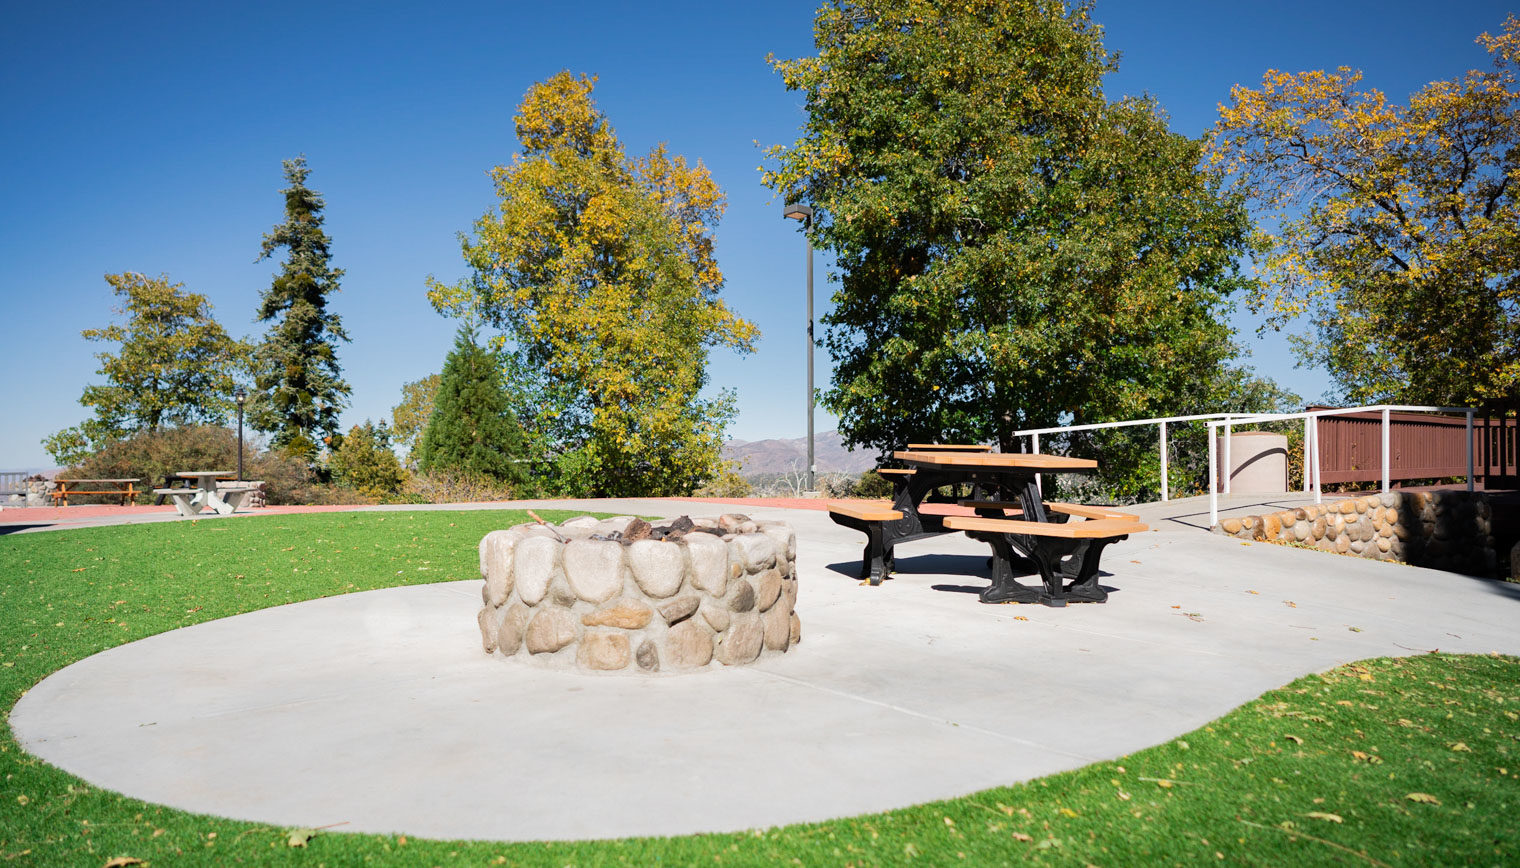 A fire pit and bench at the Overlook.